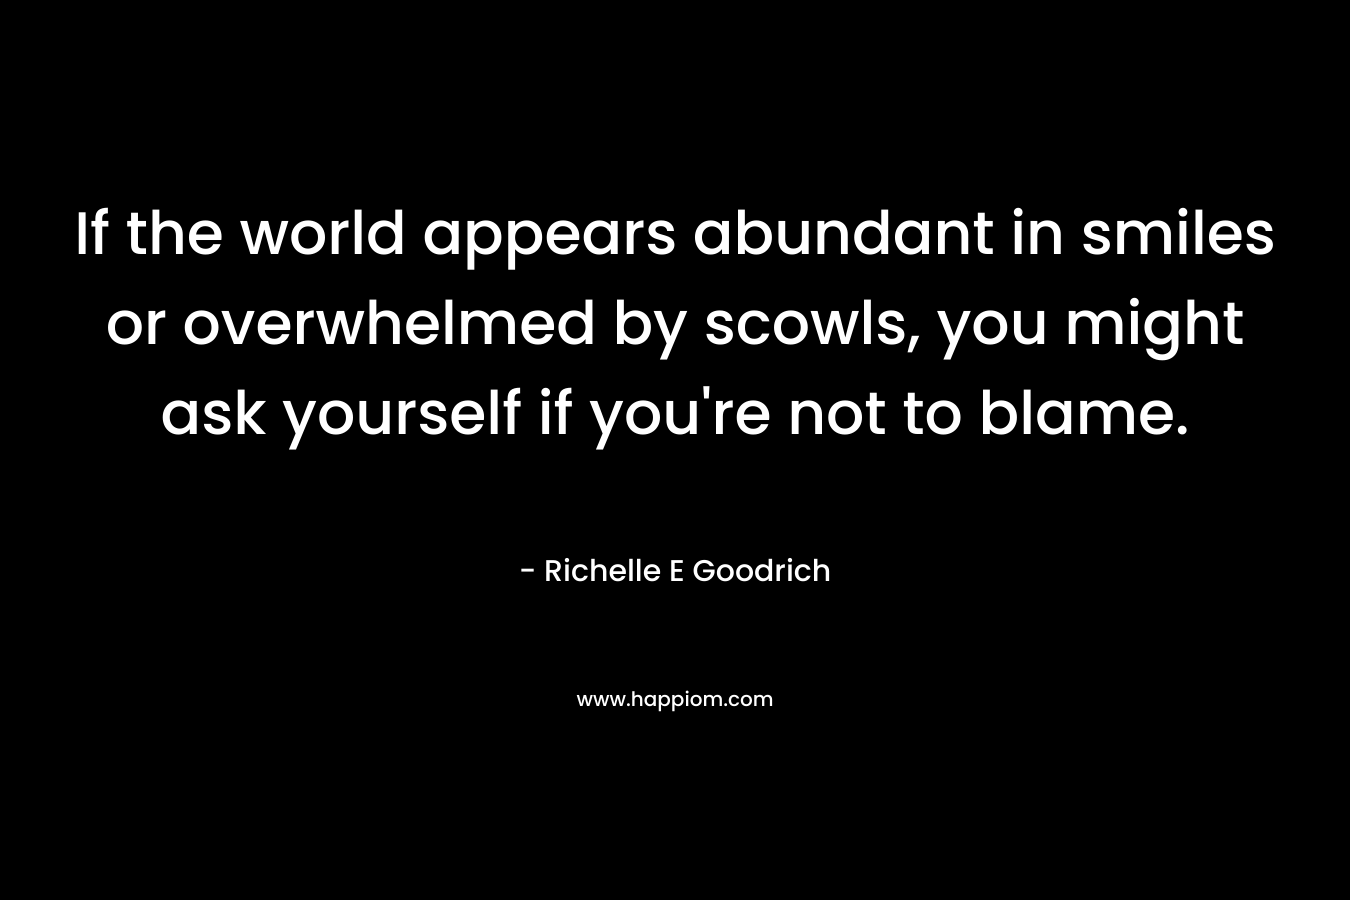 If the world appears abundant in smiles or overwhelmed by scowls, you might ask yourself if you’re not to blame. – Richelle E Goodrich